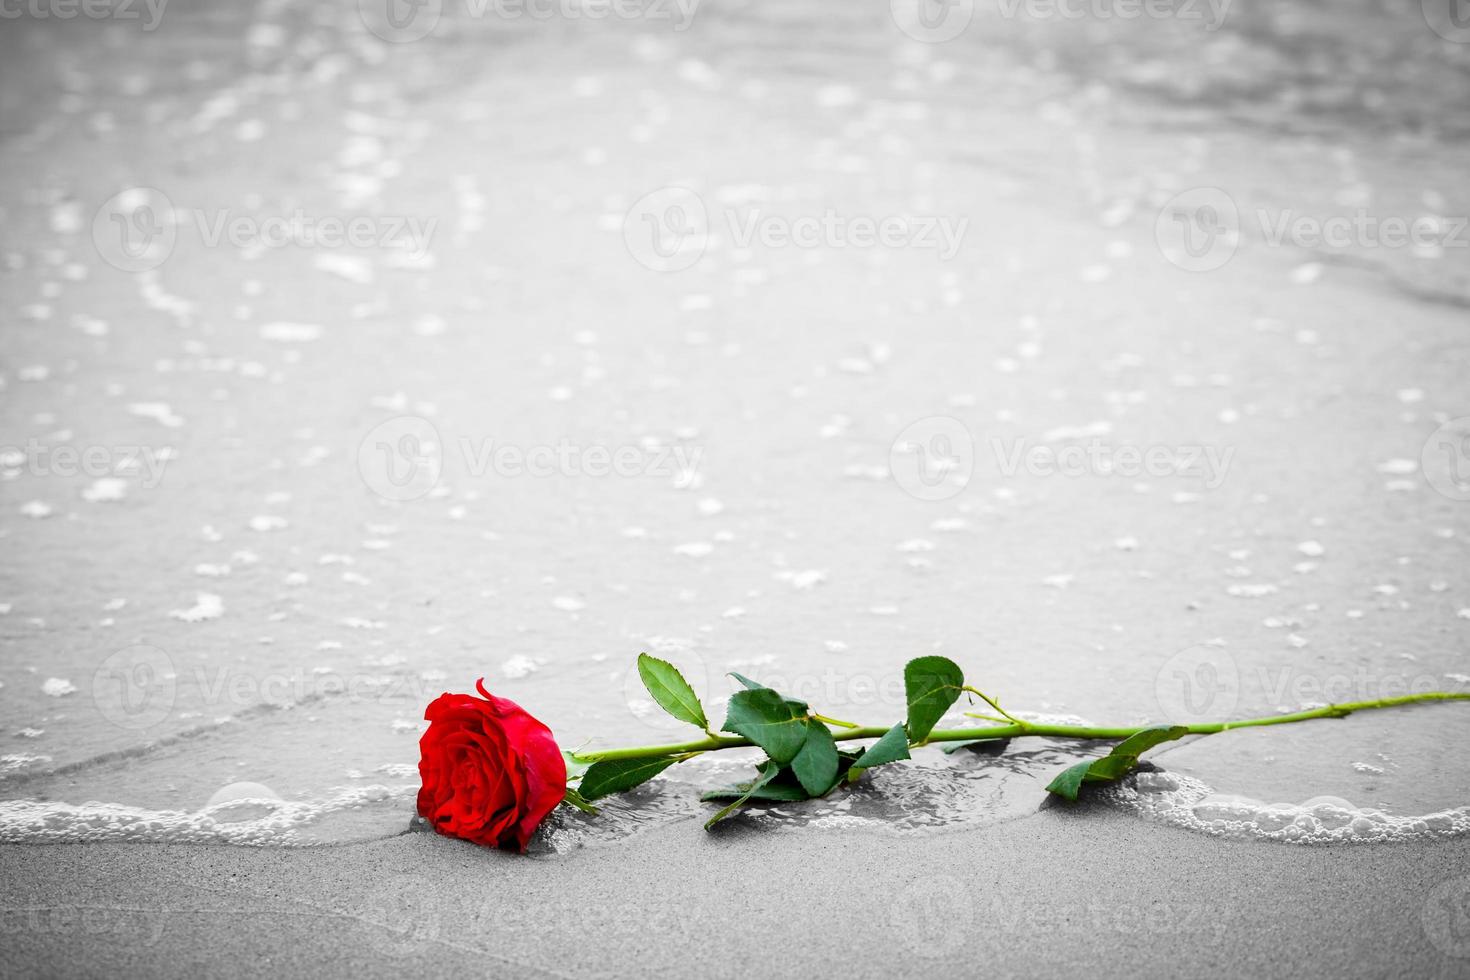 Waves washing away a red rose from the beach. Color against black and white. Love photo